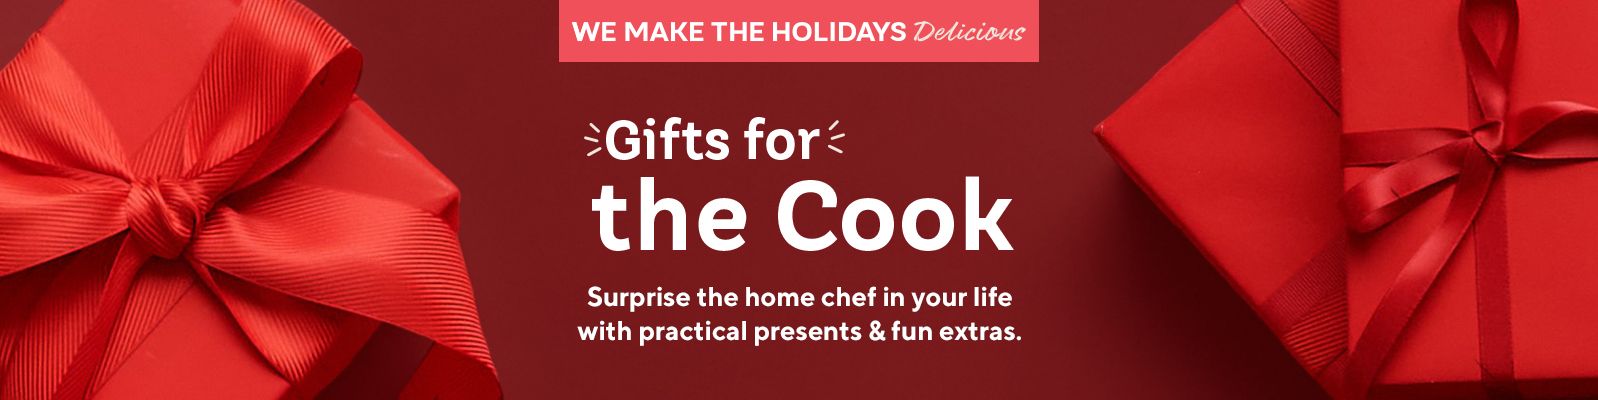 Gifts for the Cook  Surprise the home chef in your life with practical presents & fun extras.